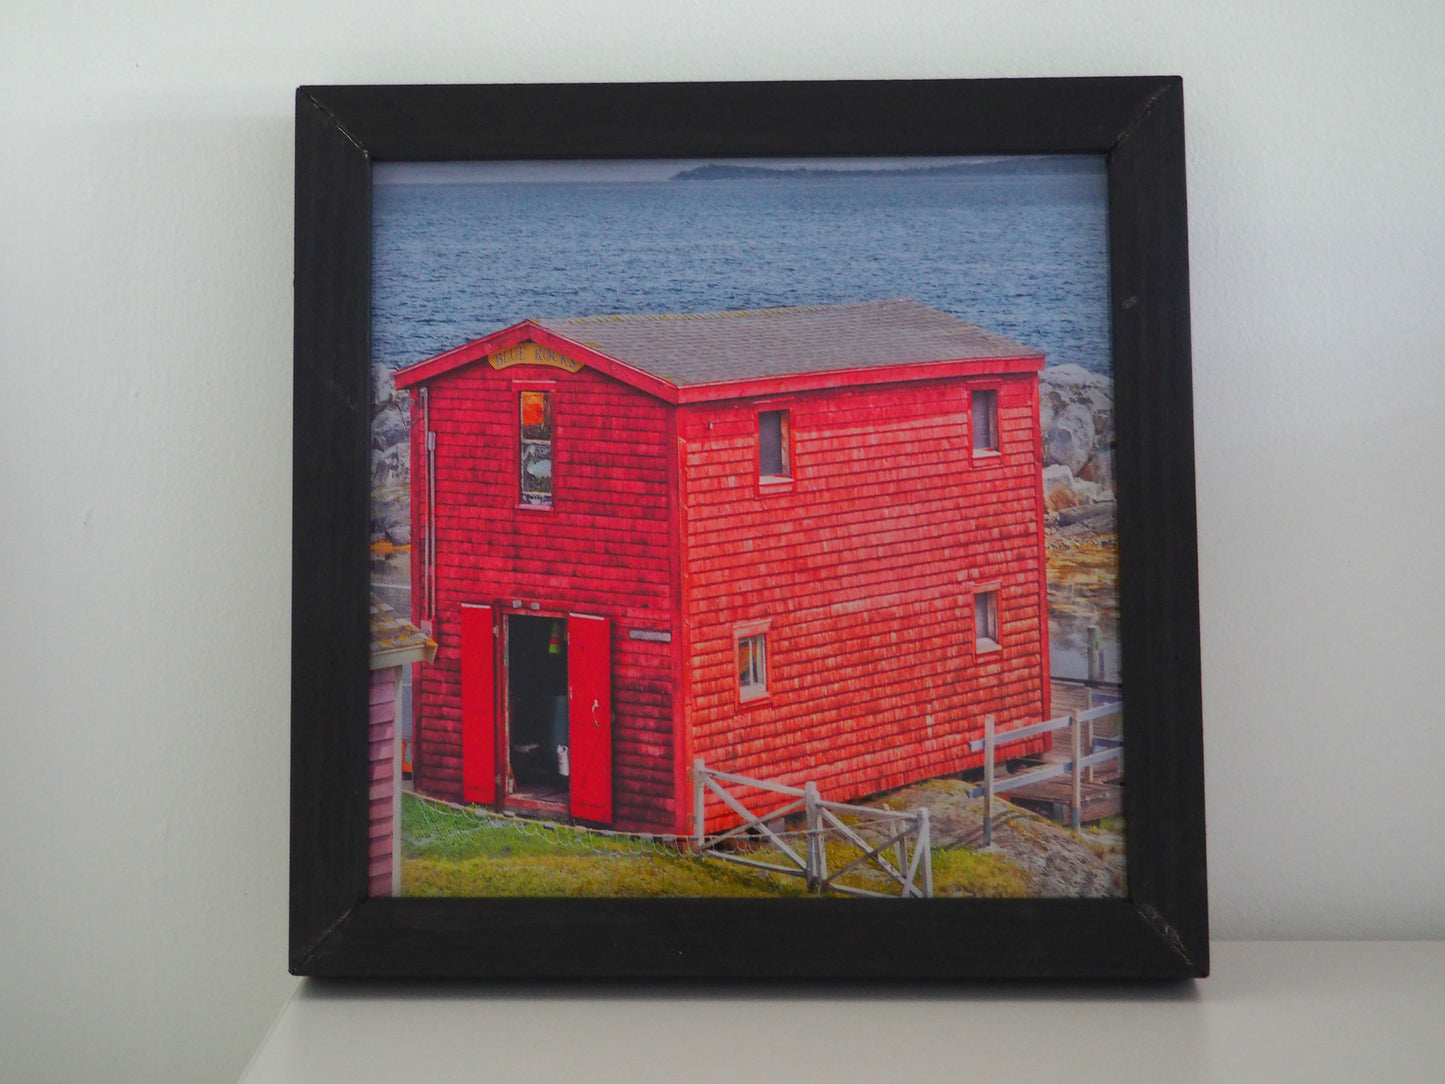 Spectacular view of Blue Rocks harbour featuring a picturesque red barn.   Photography 7.5 x 7.5 inches covered with resin in a handmade black wooden frame 9 x 9 inches.  Ready-to-hang in your favorite room.